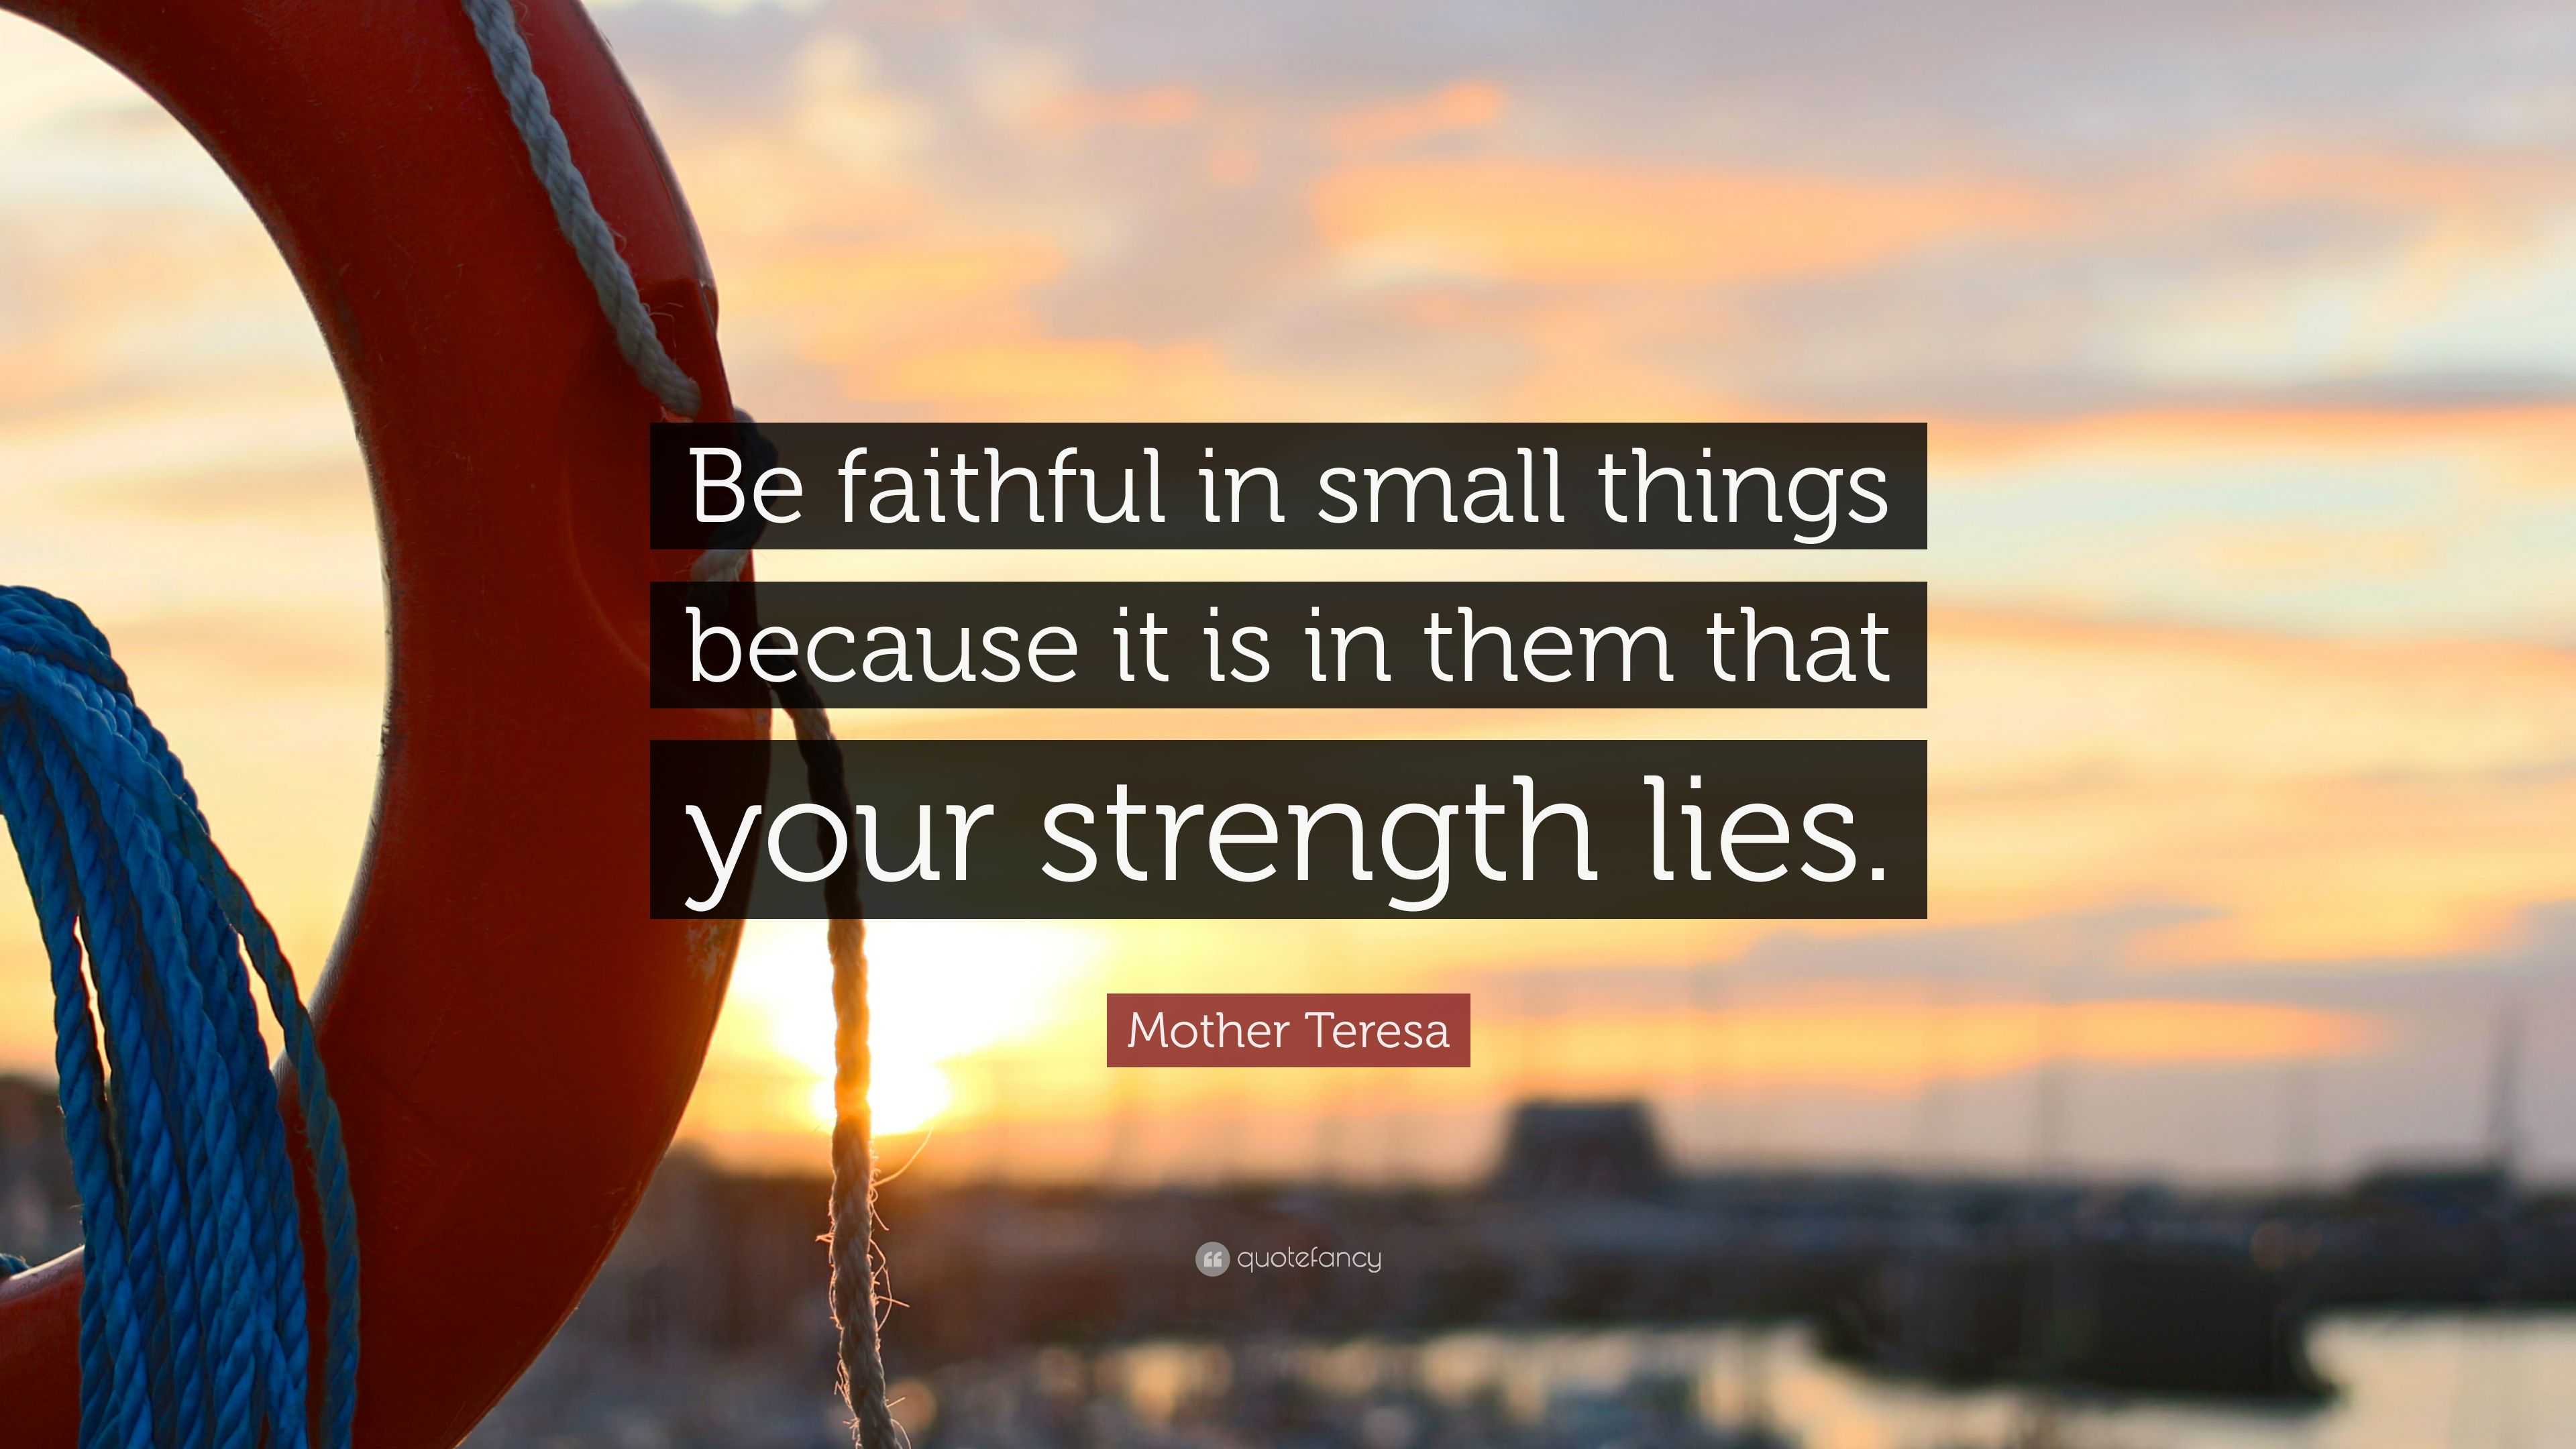 Mother Teresa Quote: “Be faithful in small things because it is in them